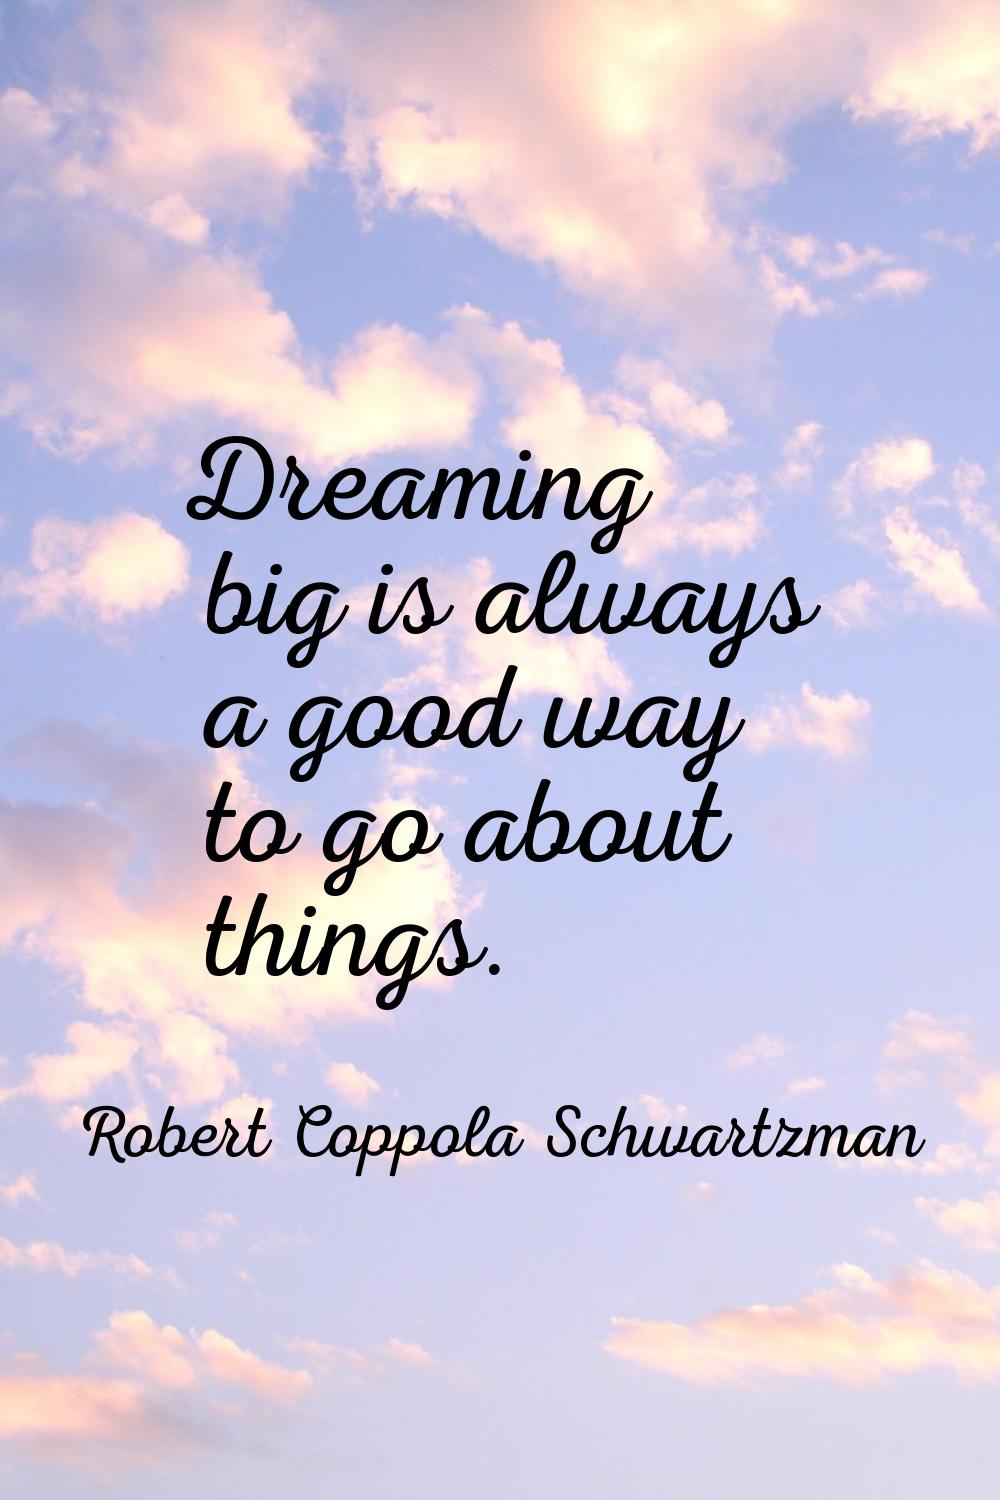 Dreaming big is always a good way to go about things.